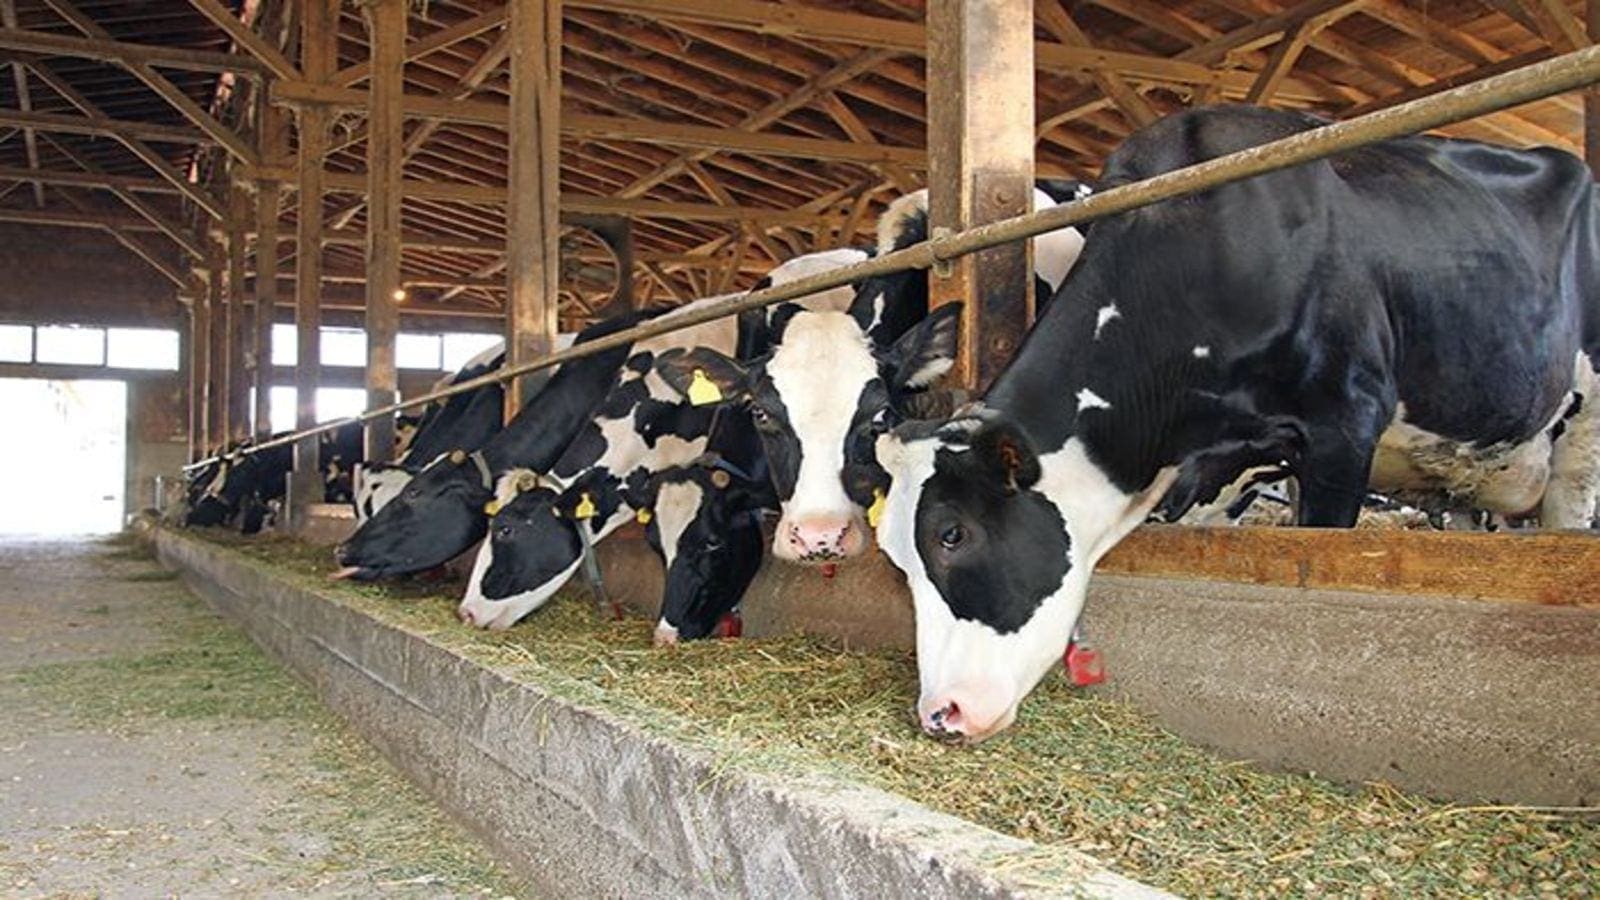 Zimbabwe milk production rises to 83 million litres on back of five-year dairy development plan